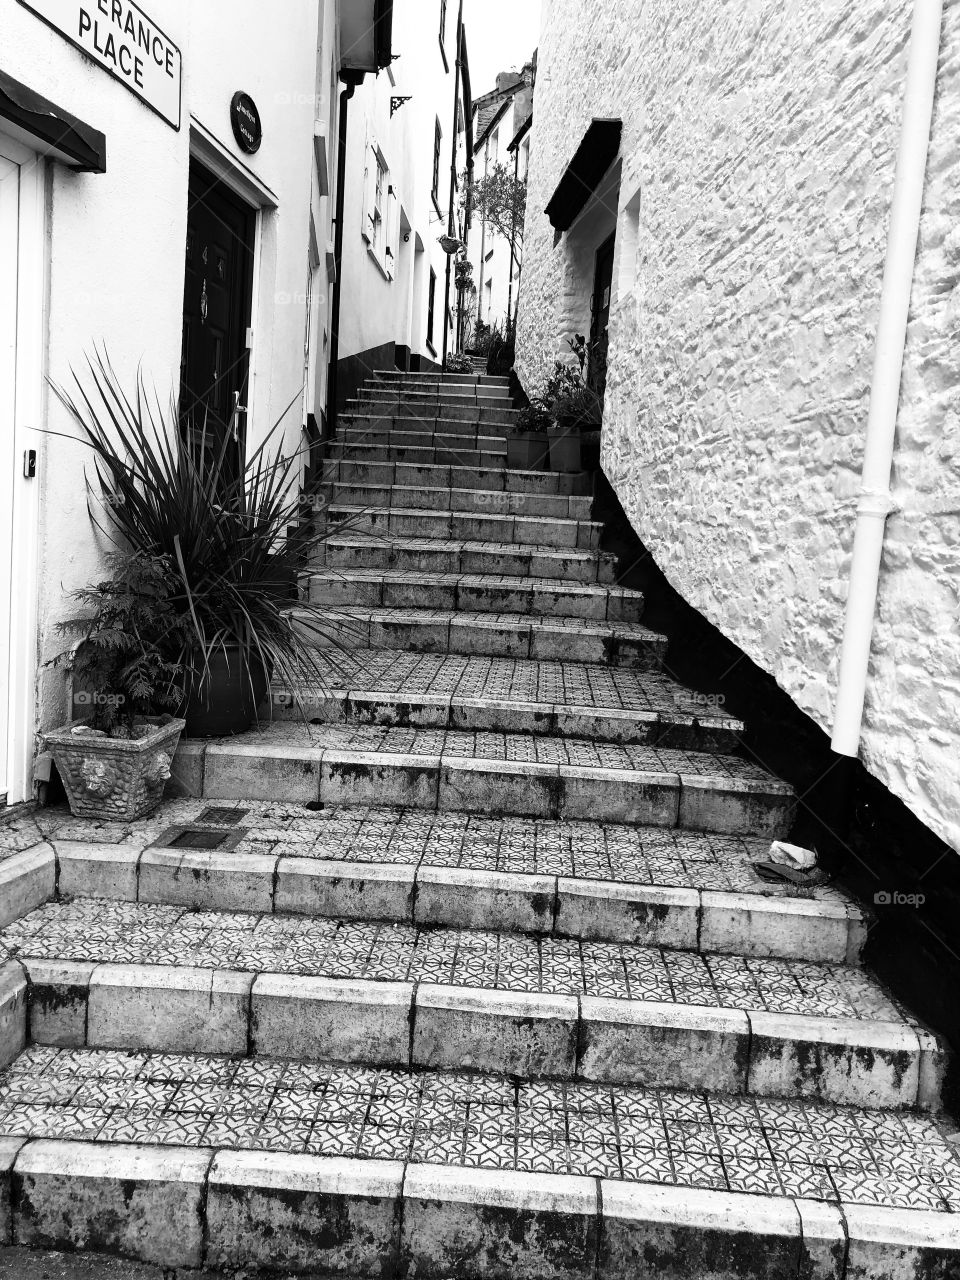 Perhaps these Brixham steps, rather steep and not for those without some vigor. Maybe they present a better spectacle in black and white, rather than colour.